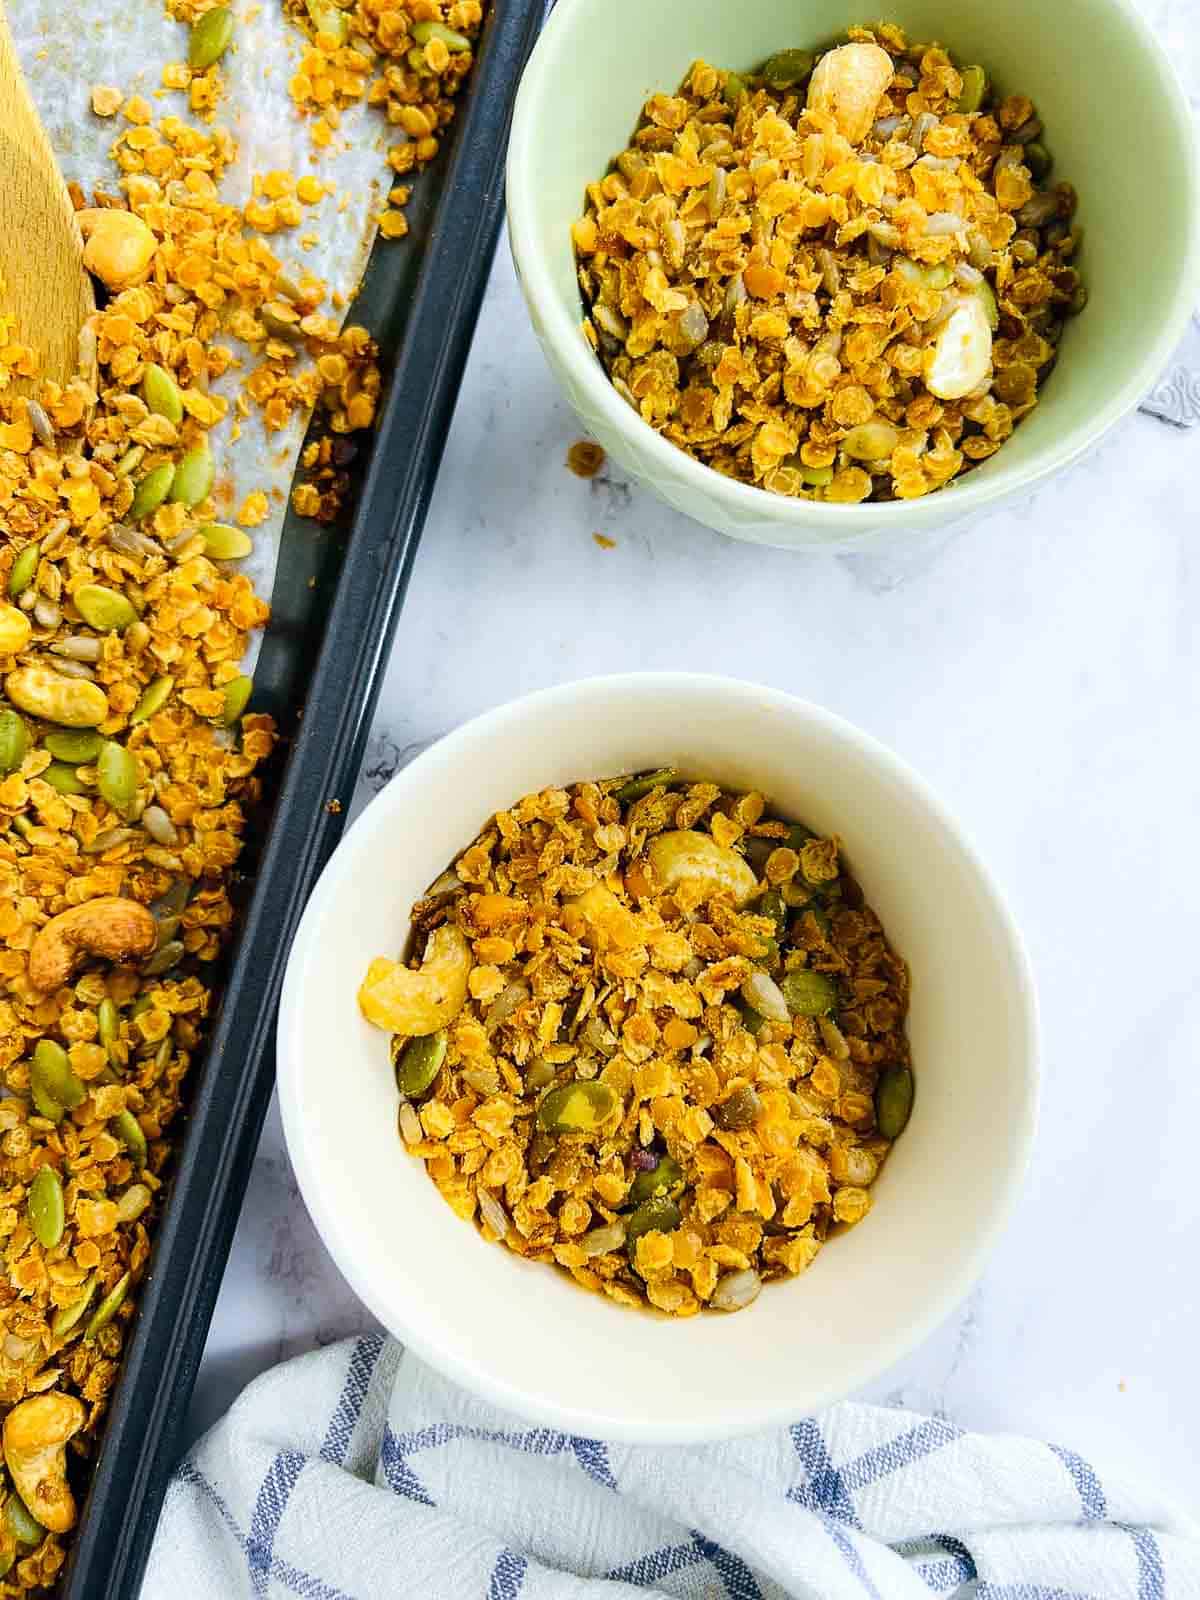 Red lentil granola served in small bowls.